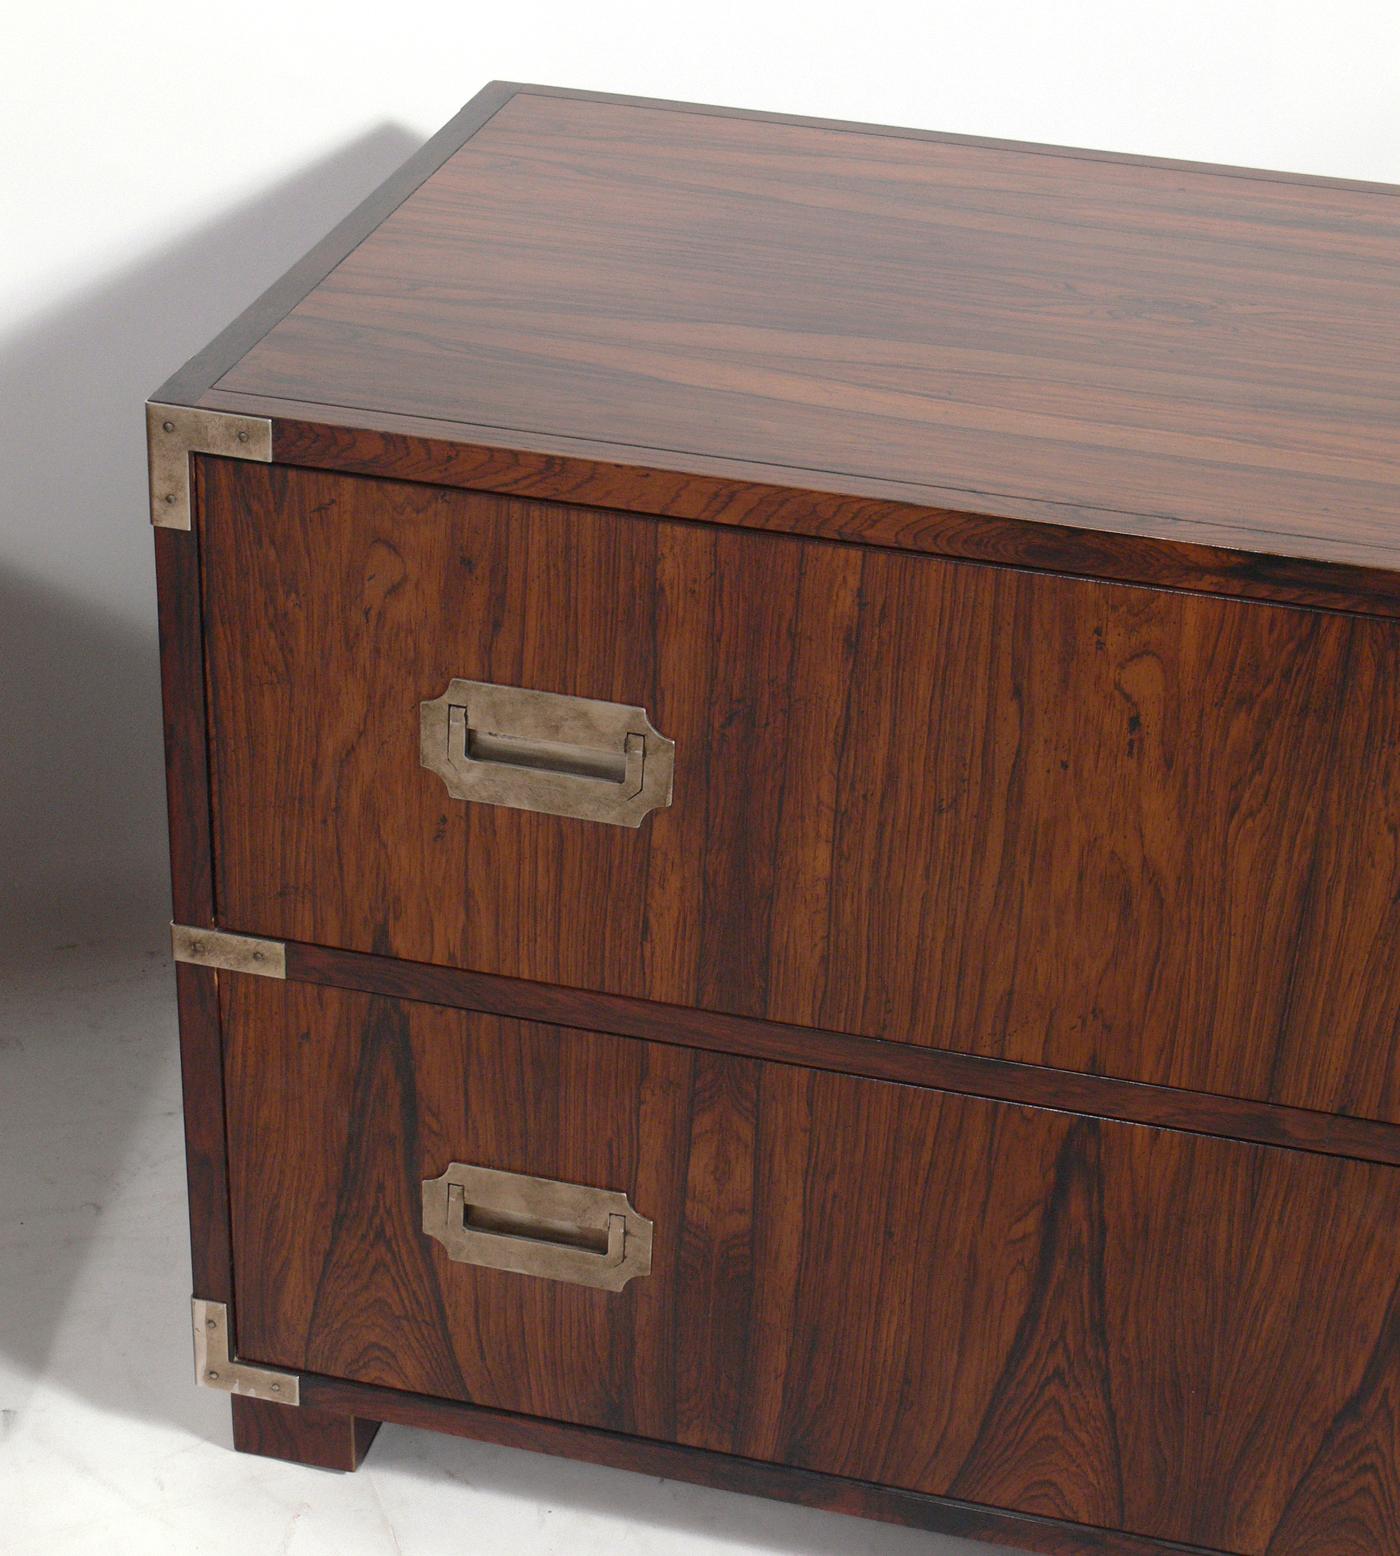 Plated Pair of Campaign Chests or Nightstands